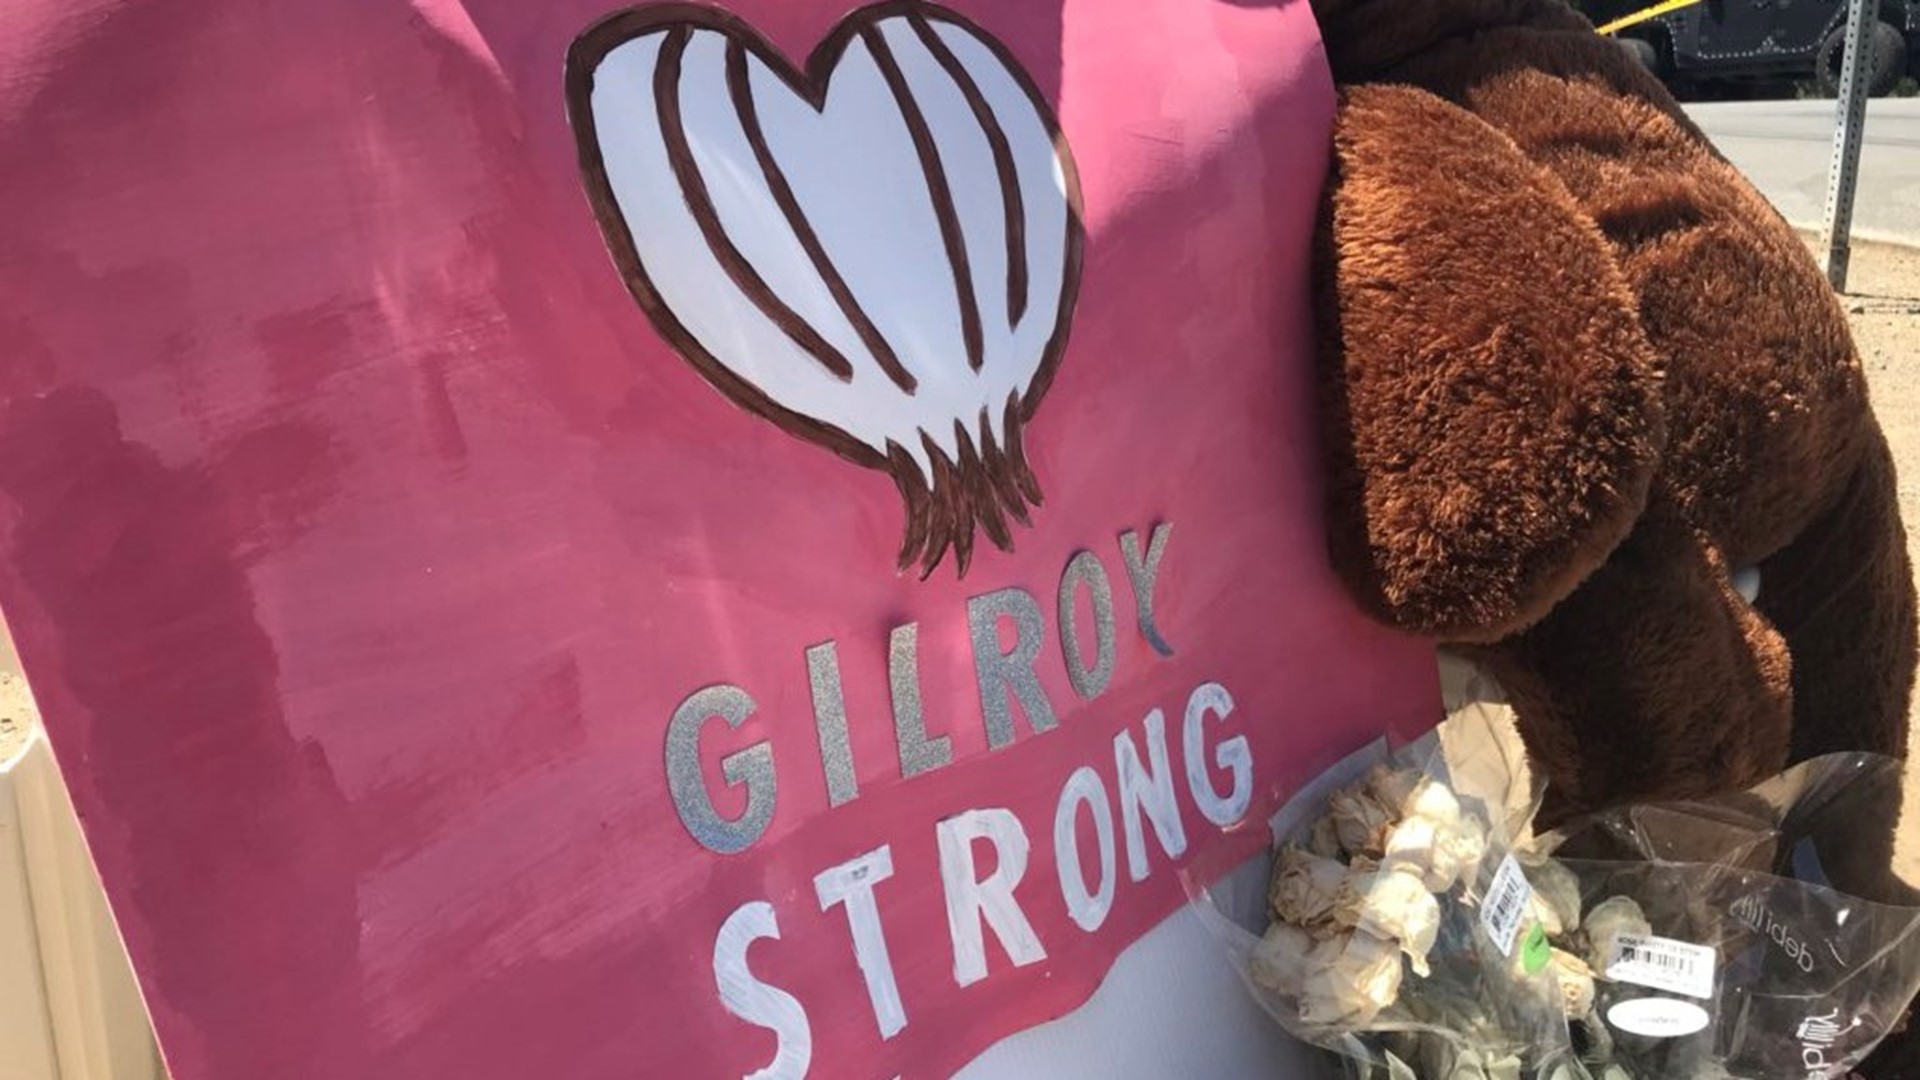 It's been a week since a gunman opened fire at the Gilroy Garlic Festival, killing three people. Locals believe their once quiet town will never quite be the same.